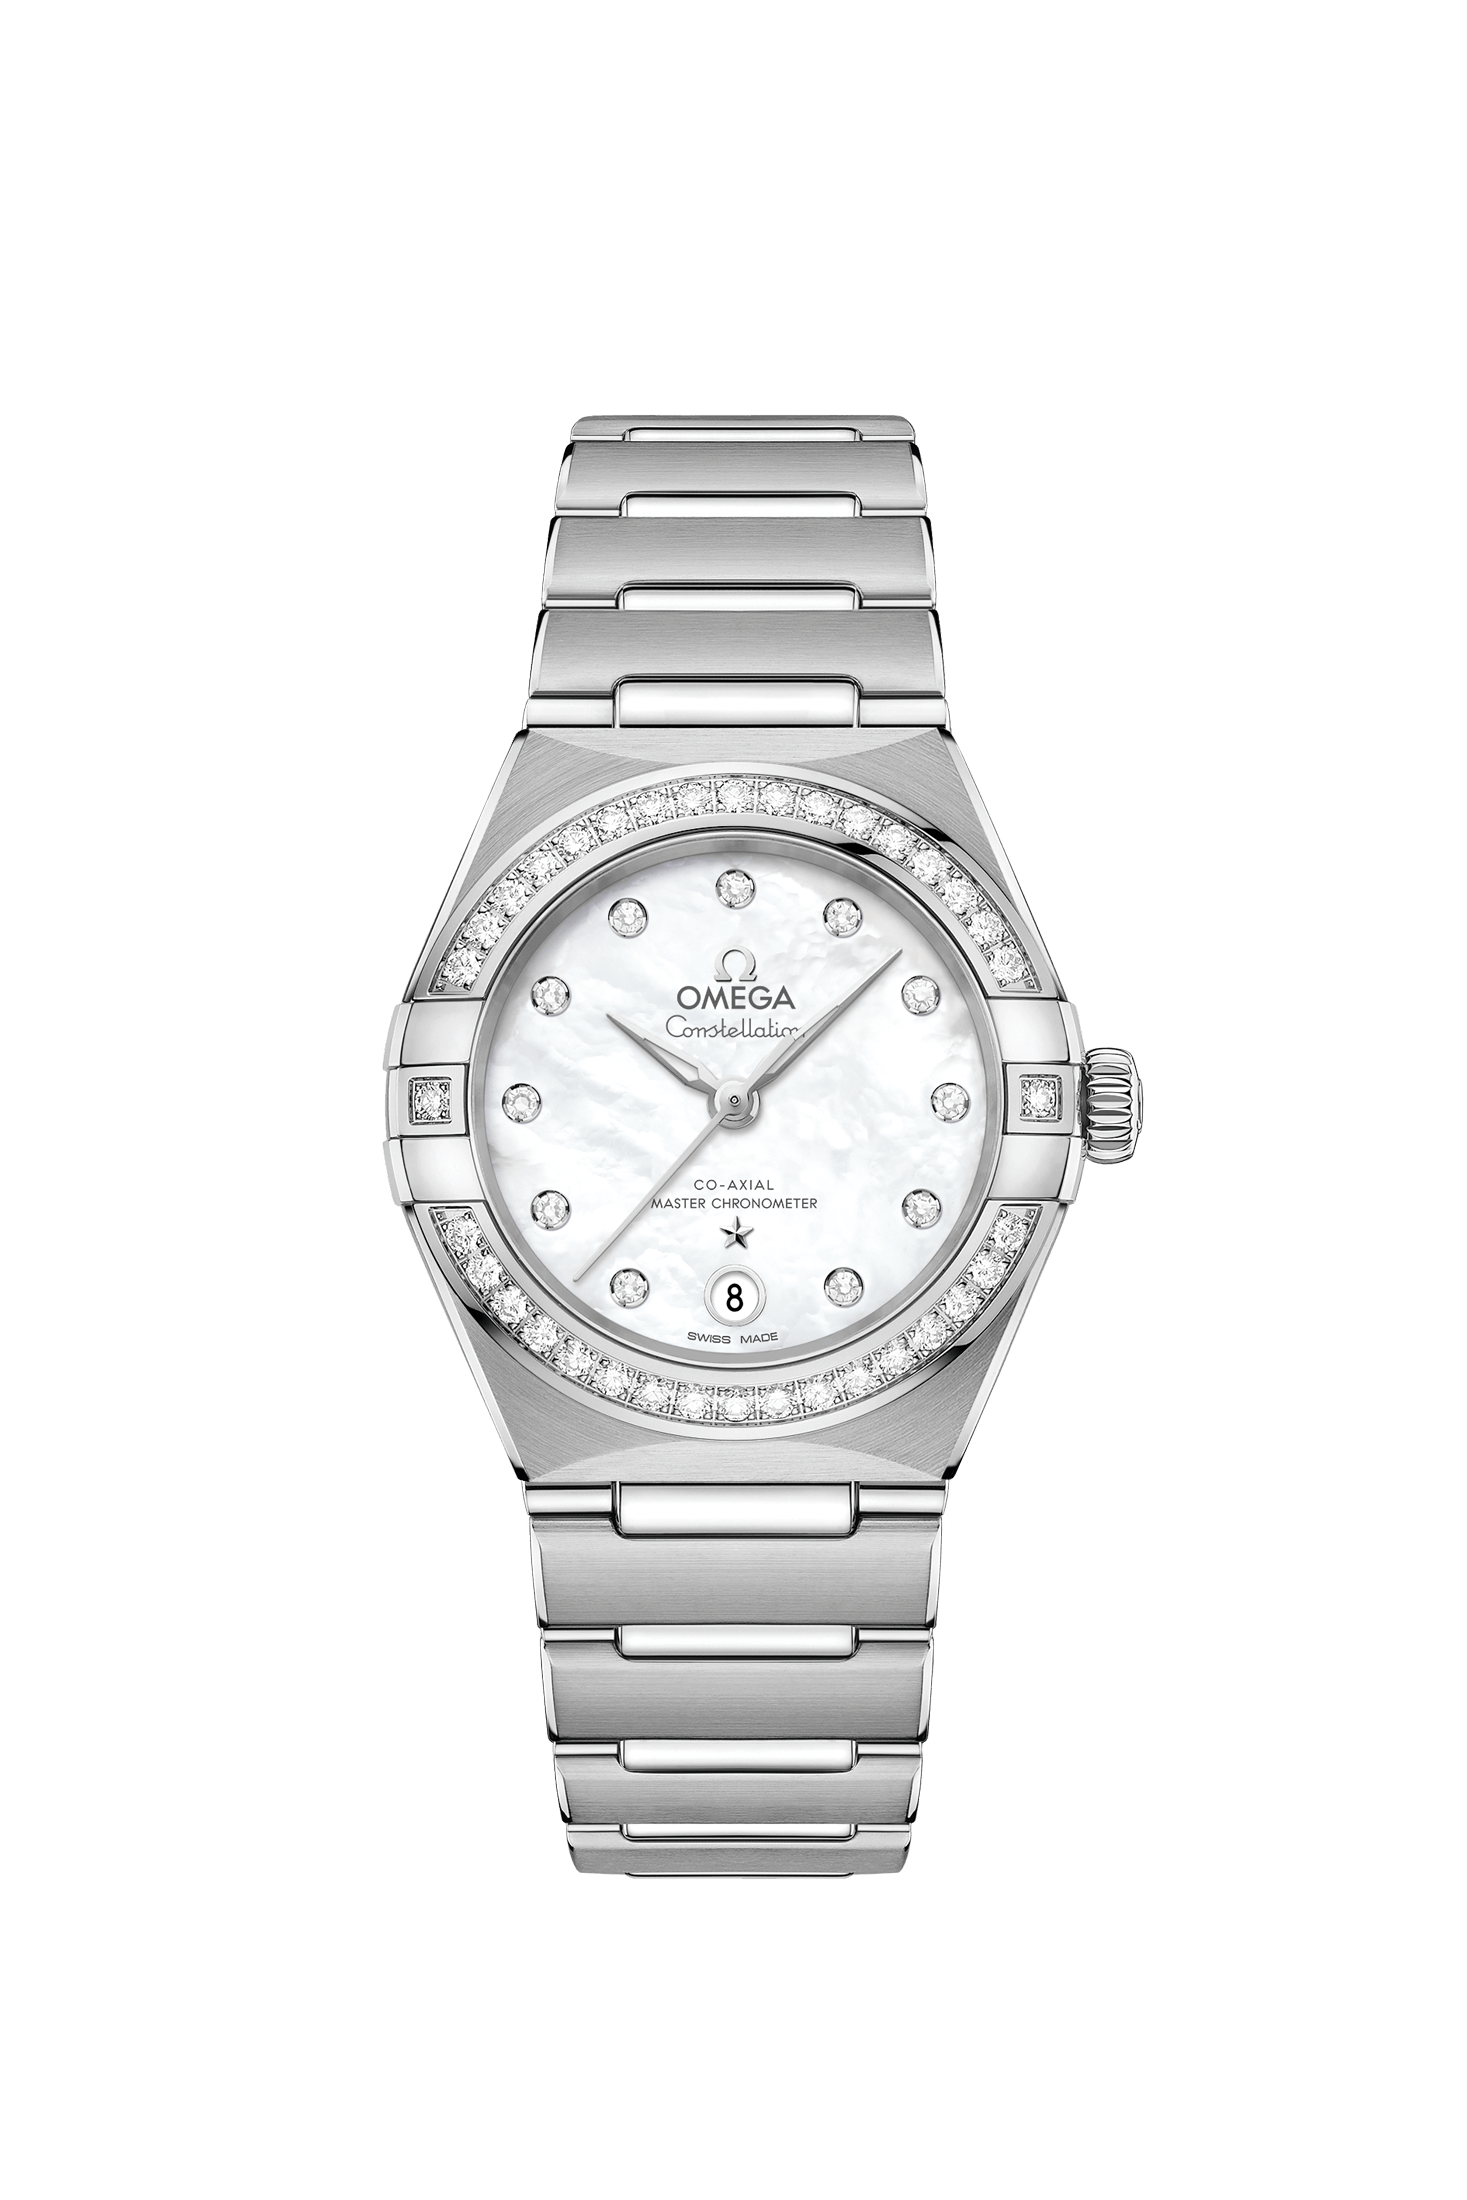 Ladies' watch  OMEGA, Constellation Co Axial Master Chronometer / 29mm, SKU: 131.15.29.20.55.001 | watchapproach.com